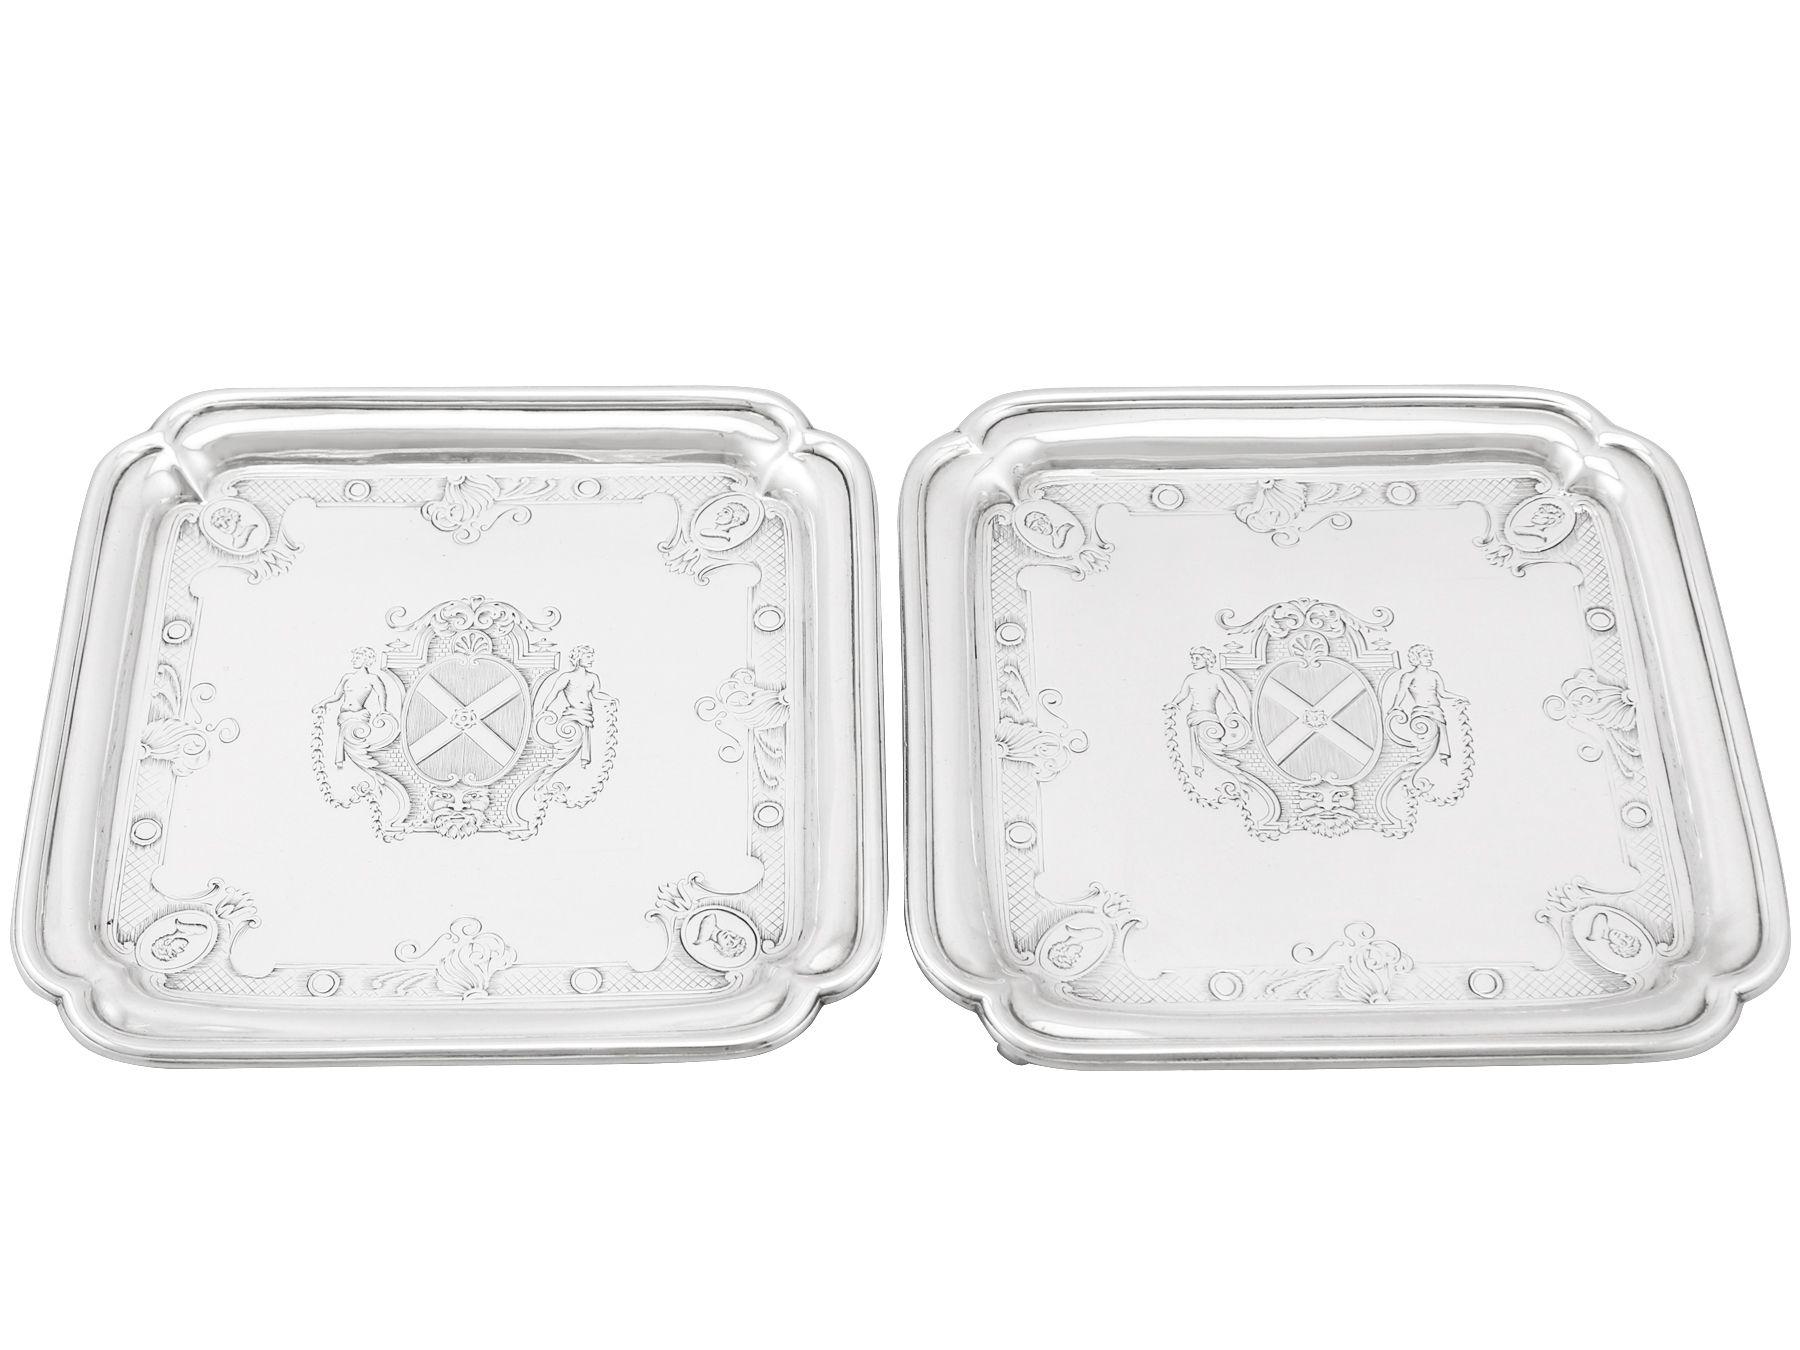 An exceptional, fine and impressive pair of antique Georgian English Britannia silver salvers made by Paul de Lamerie; an addition to our tray and salver collection.

These exceptional antique George II Britannia standard silver salvers have a